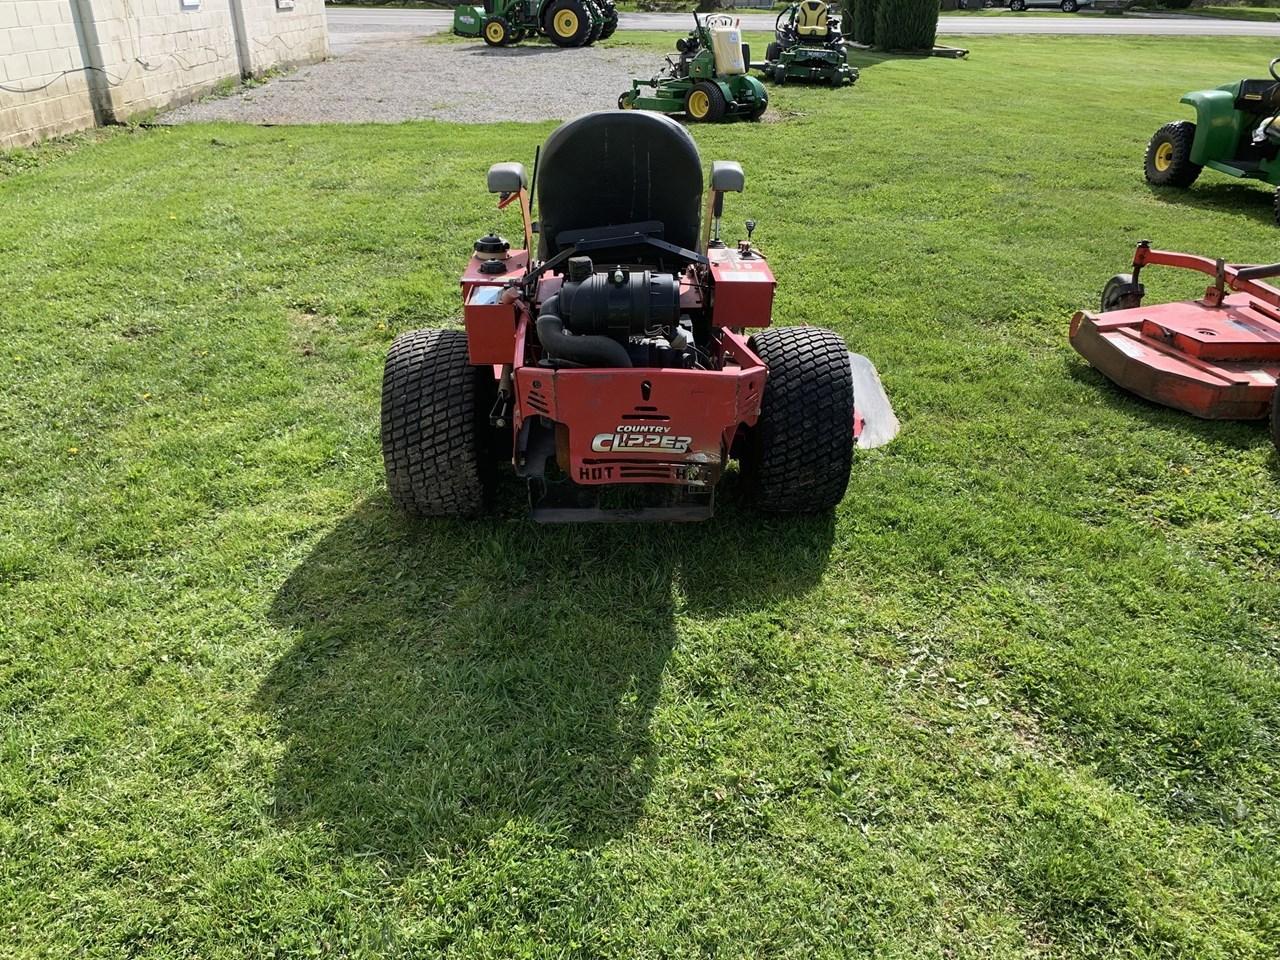 Country Clipper Boss XL Zero Turn Mower For Sale